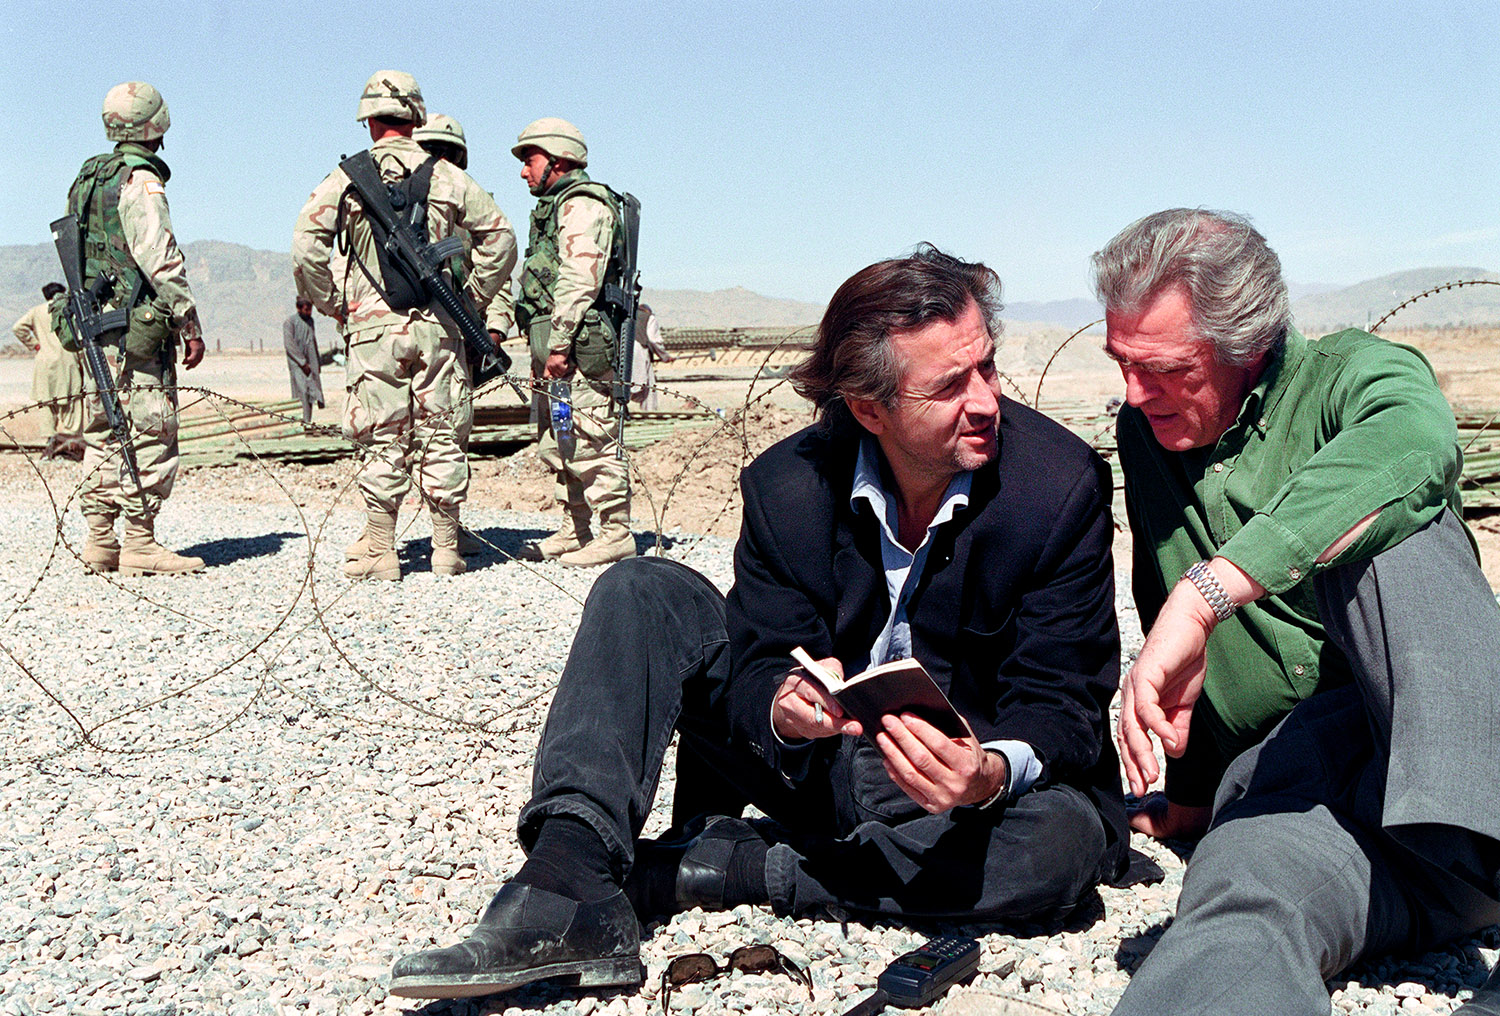 At the Kandahar airport with Gilles Hertzog and the US special forces.